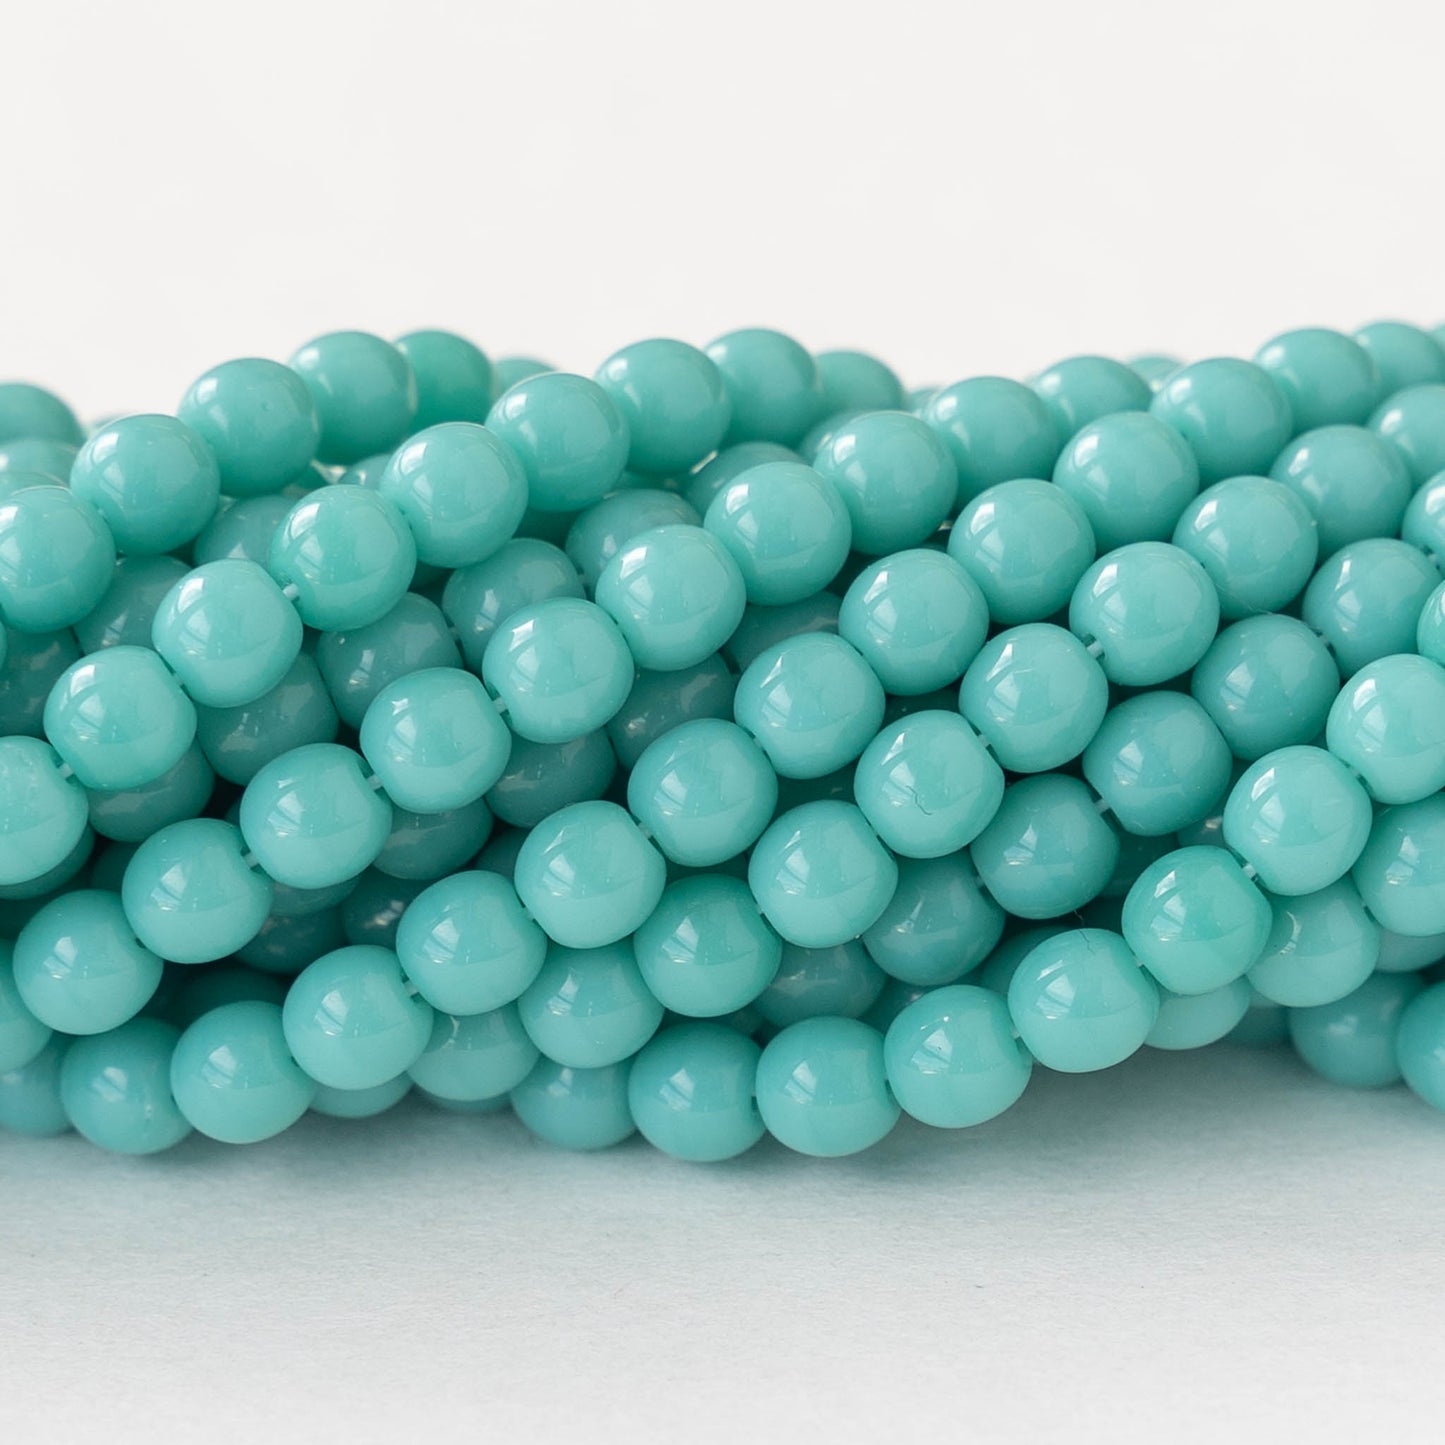 4mm Round Glass Beads - Opaque Green Turquoise - 100 Beads